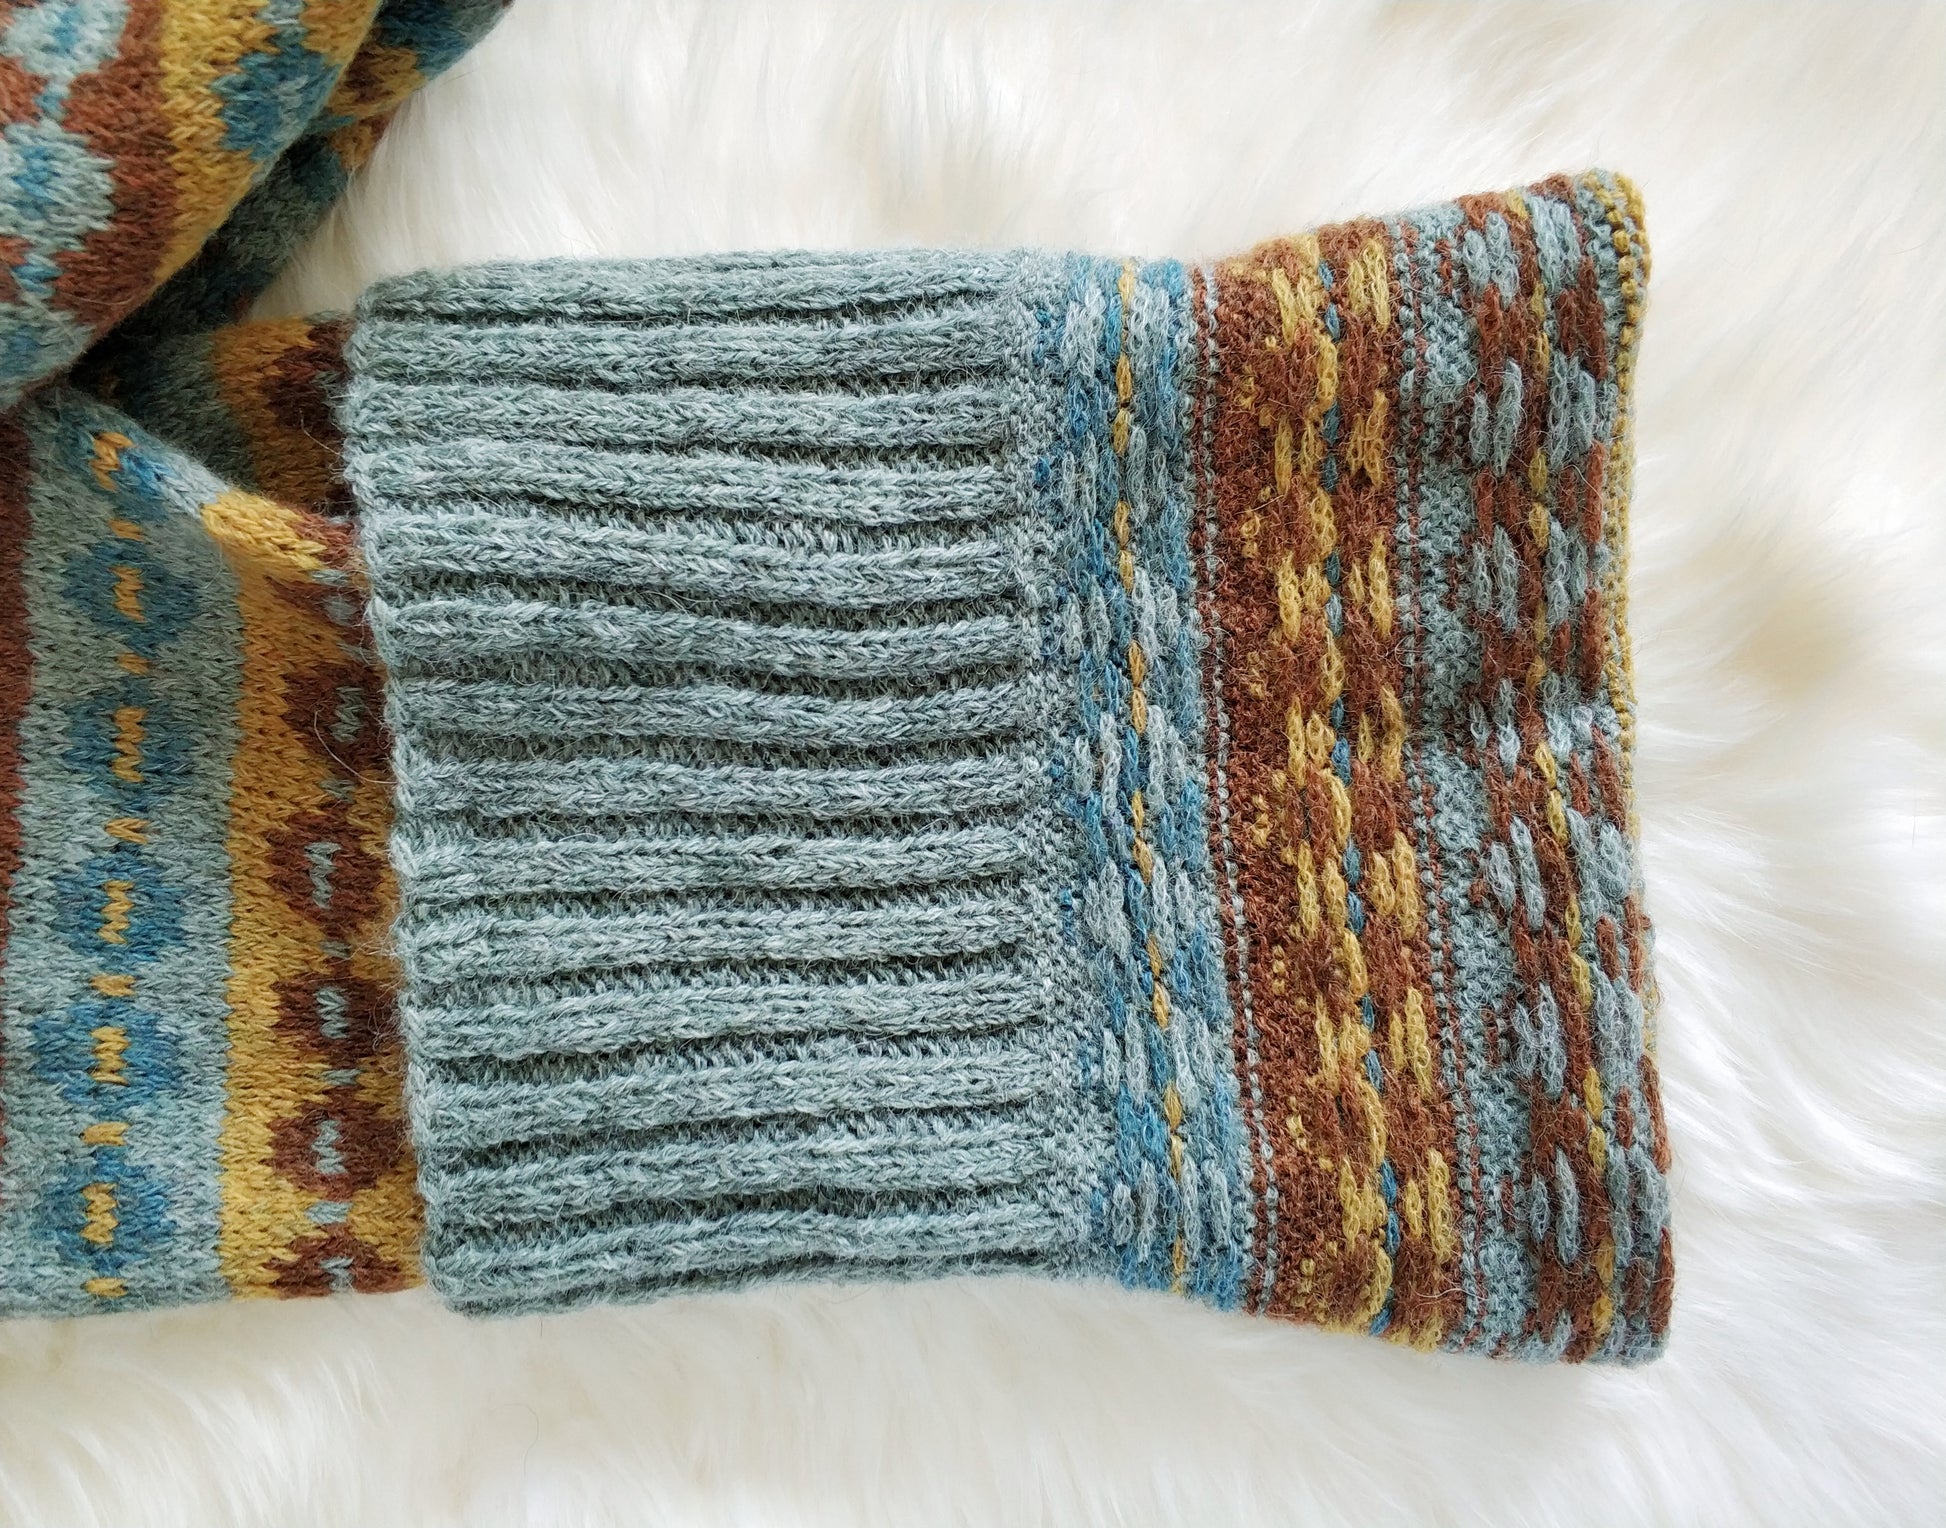 Grey, brown, yellow and blue alpaca wool hand-knitted Fair Isle long scarf, wrong side